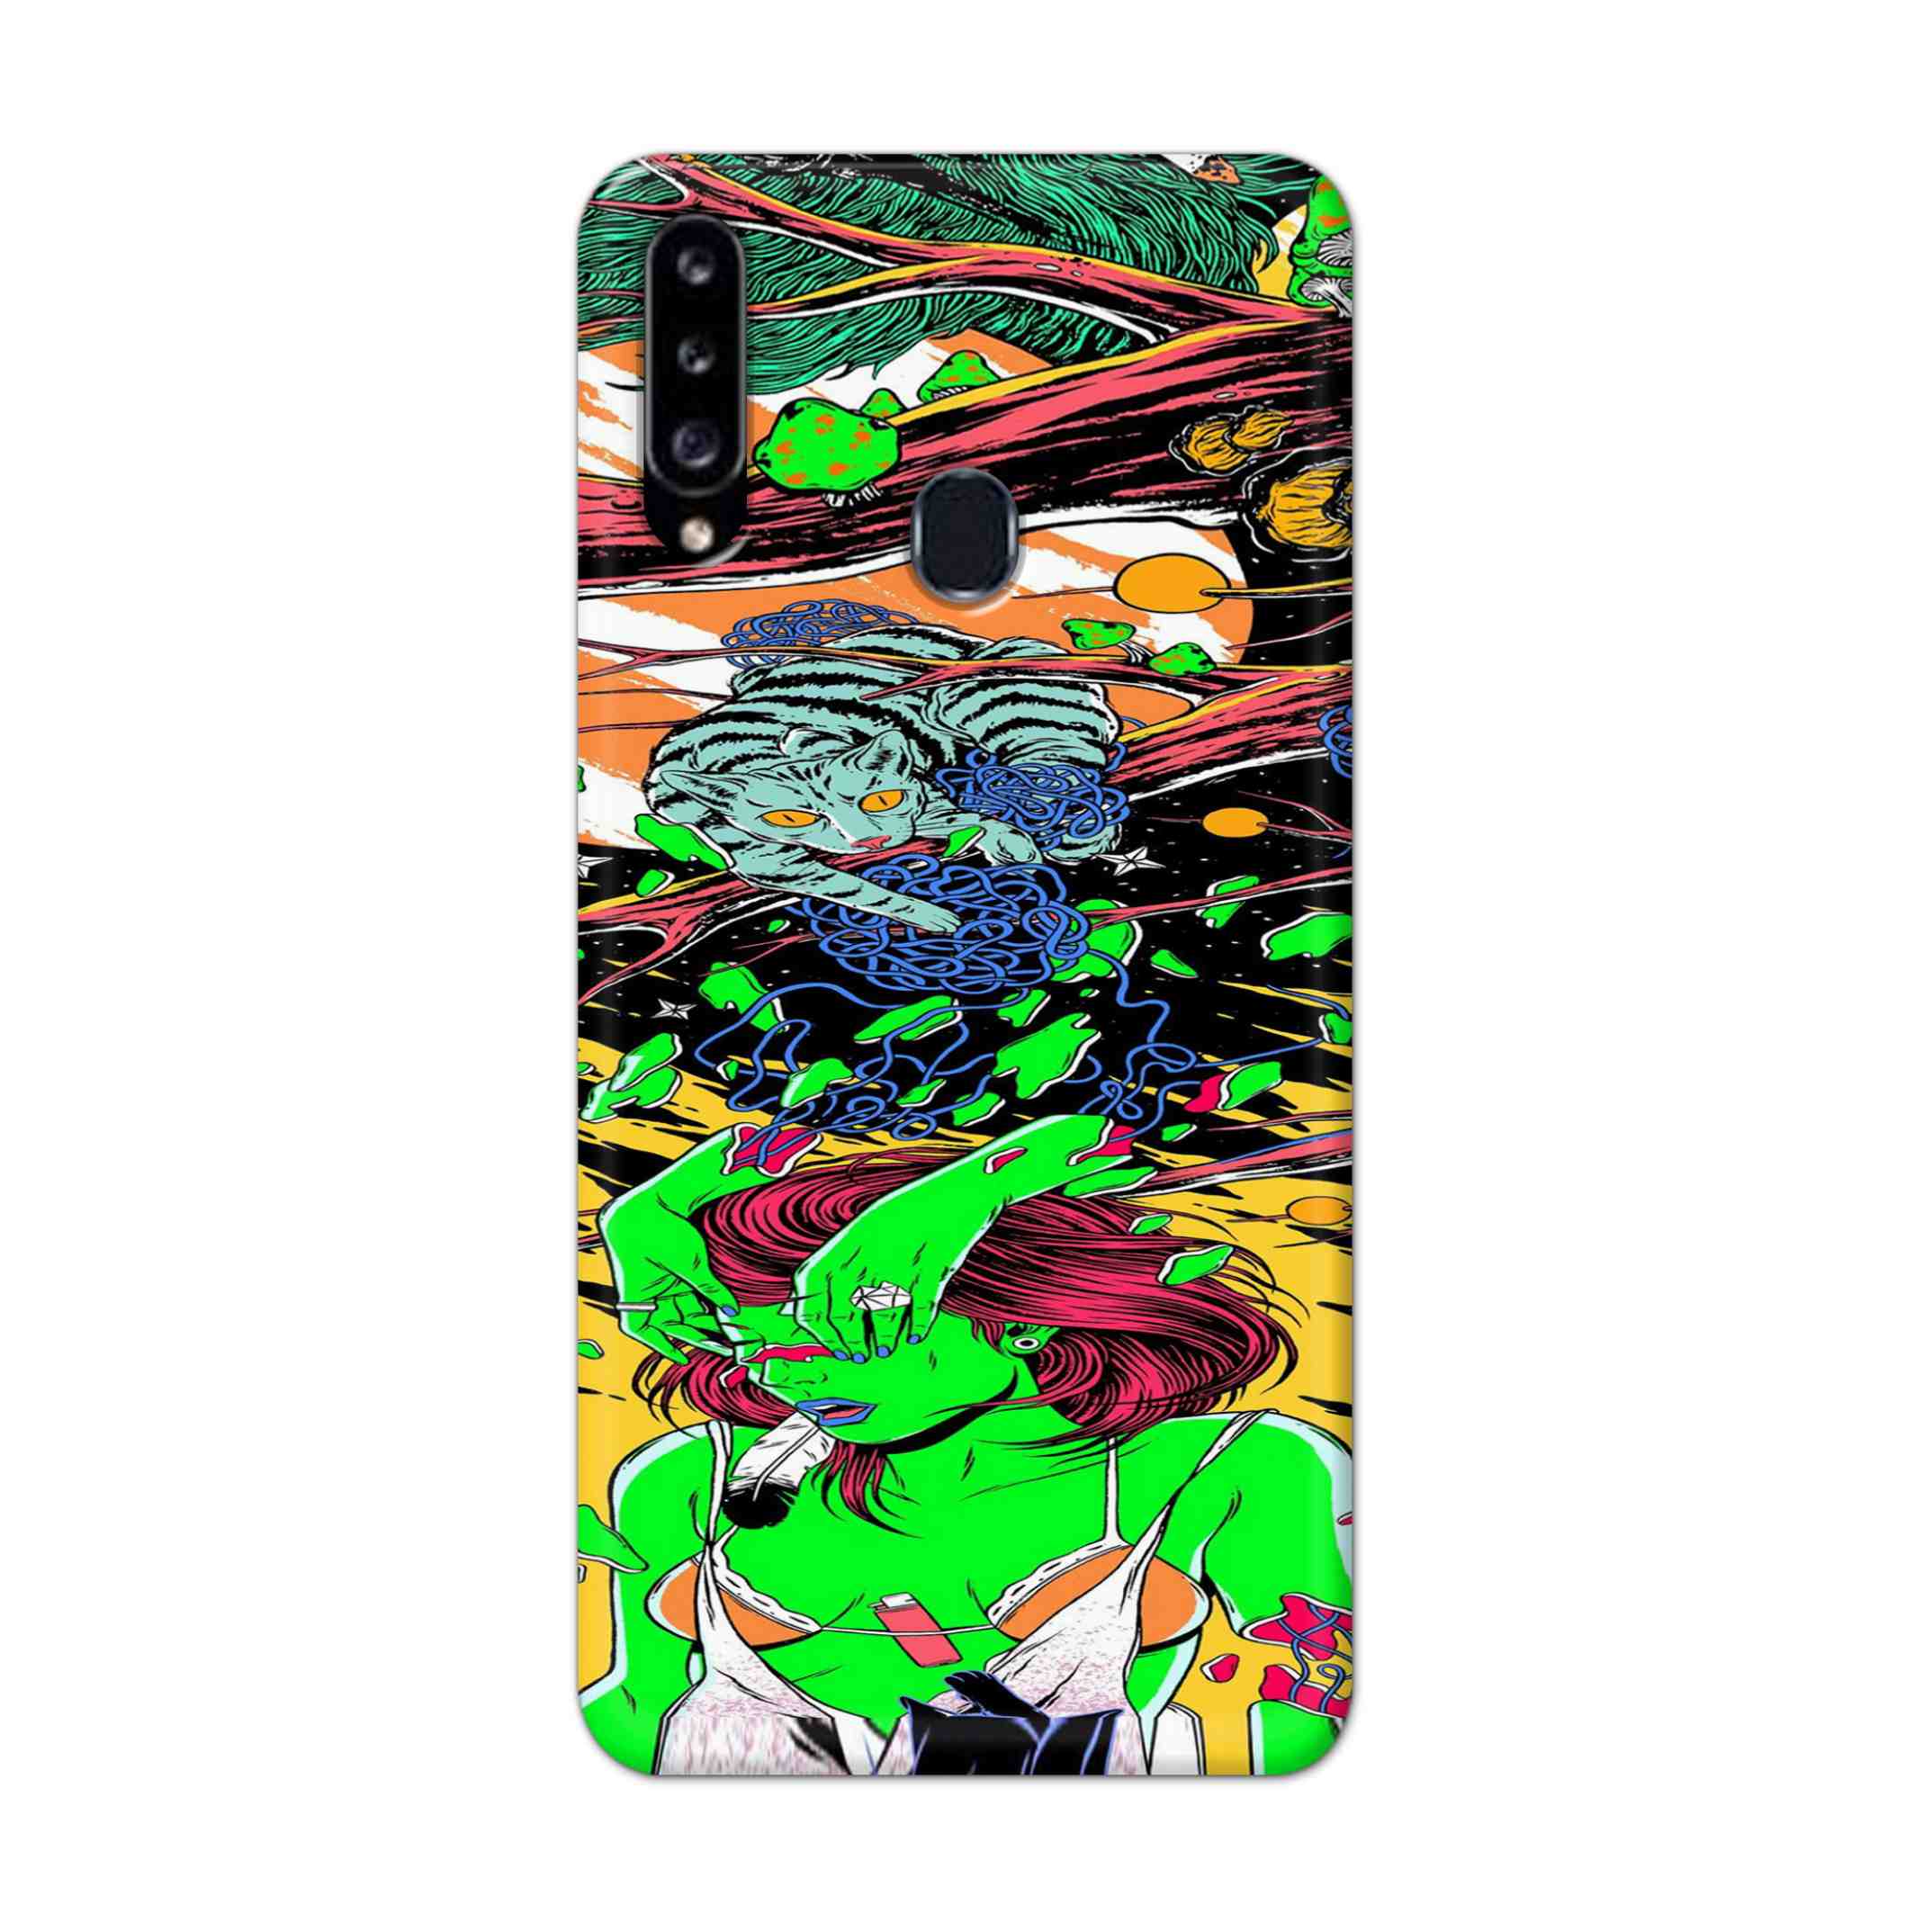 Buy Green Girl Art Hard Back Mobile Phone Case Cover For Samsung Galaxy A21 Online